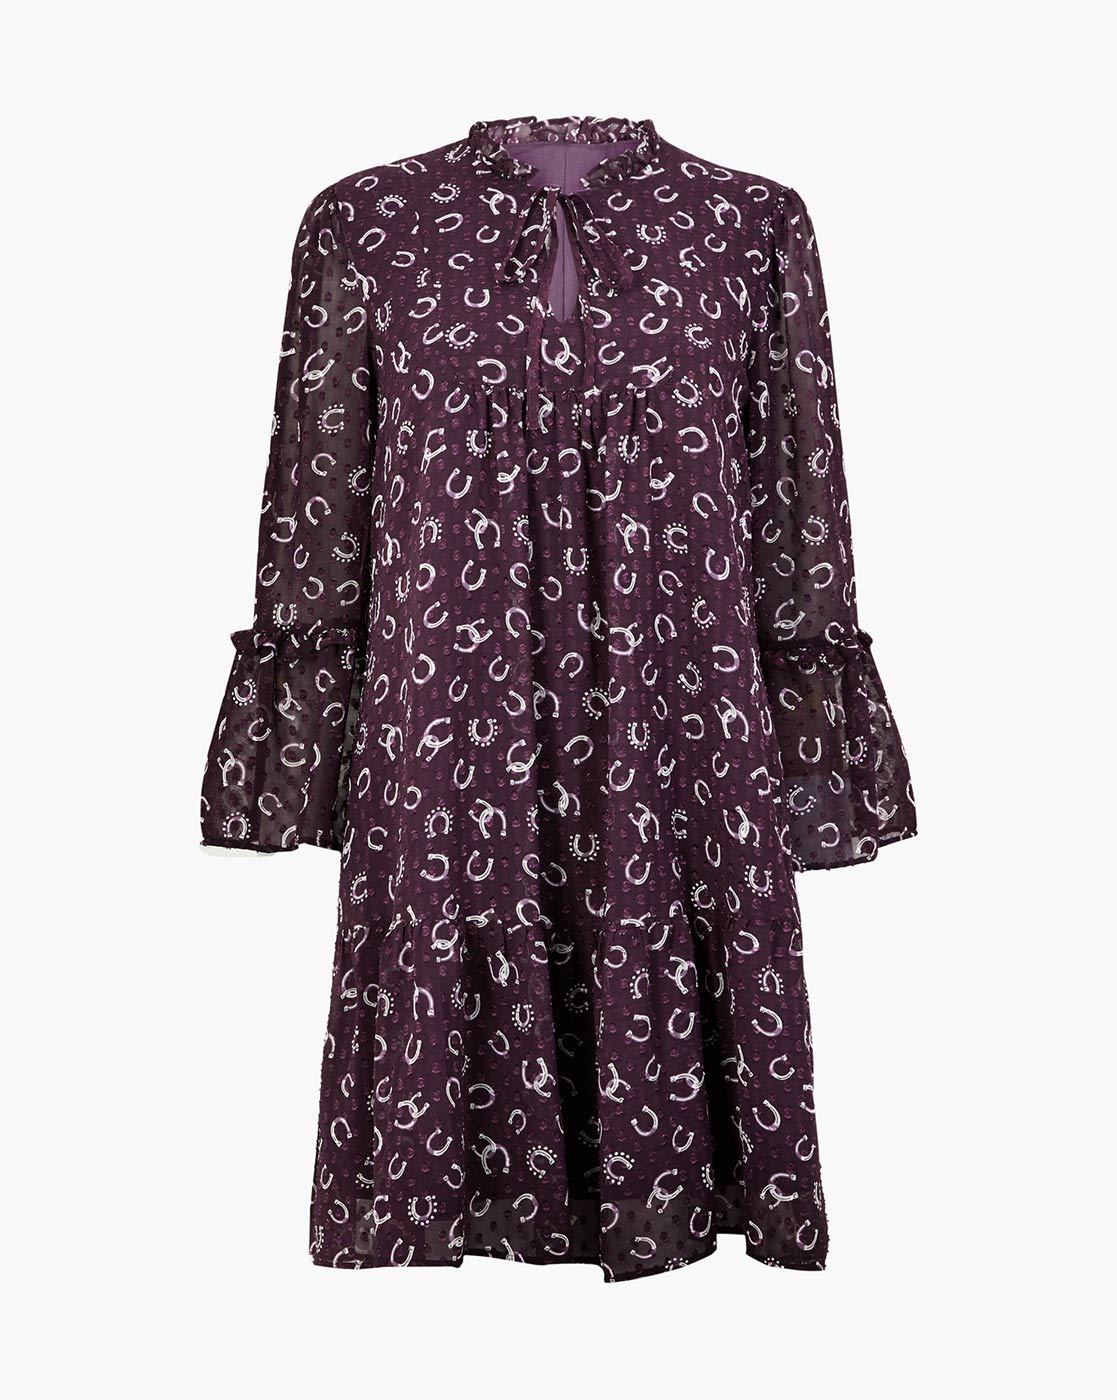 marks and spencer purple dress